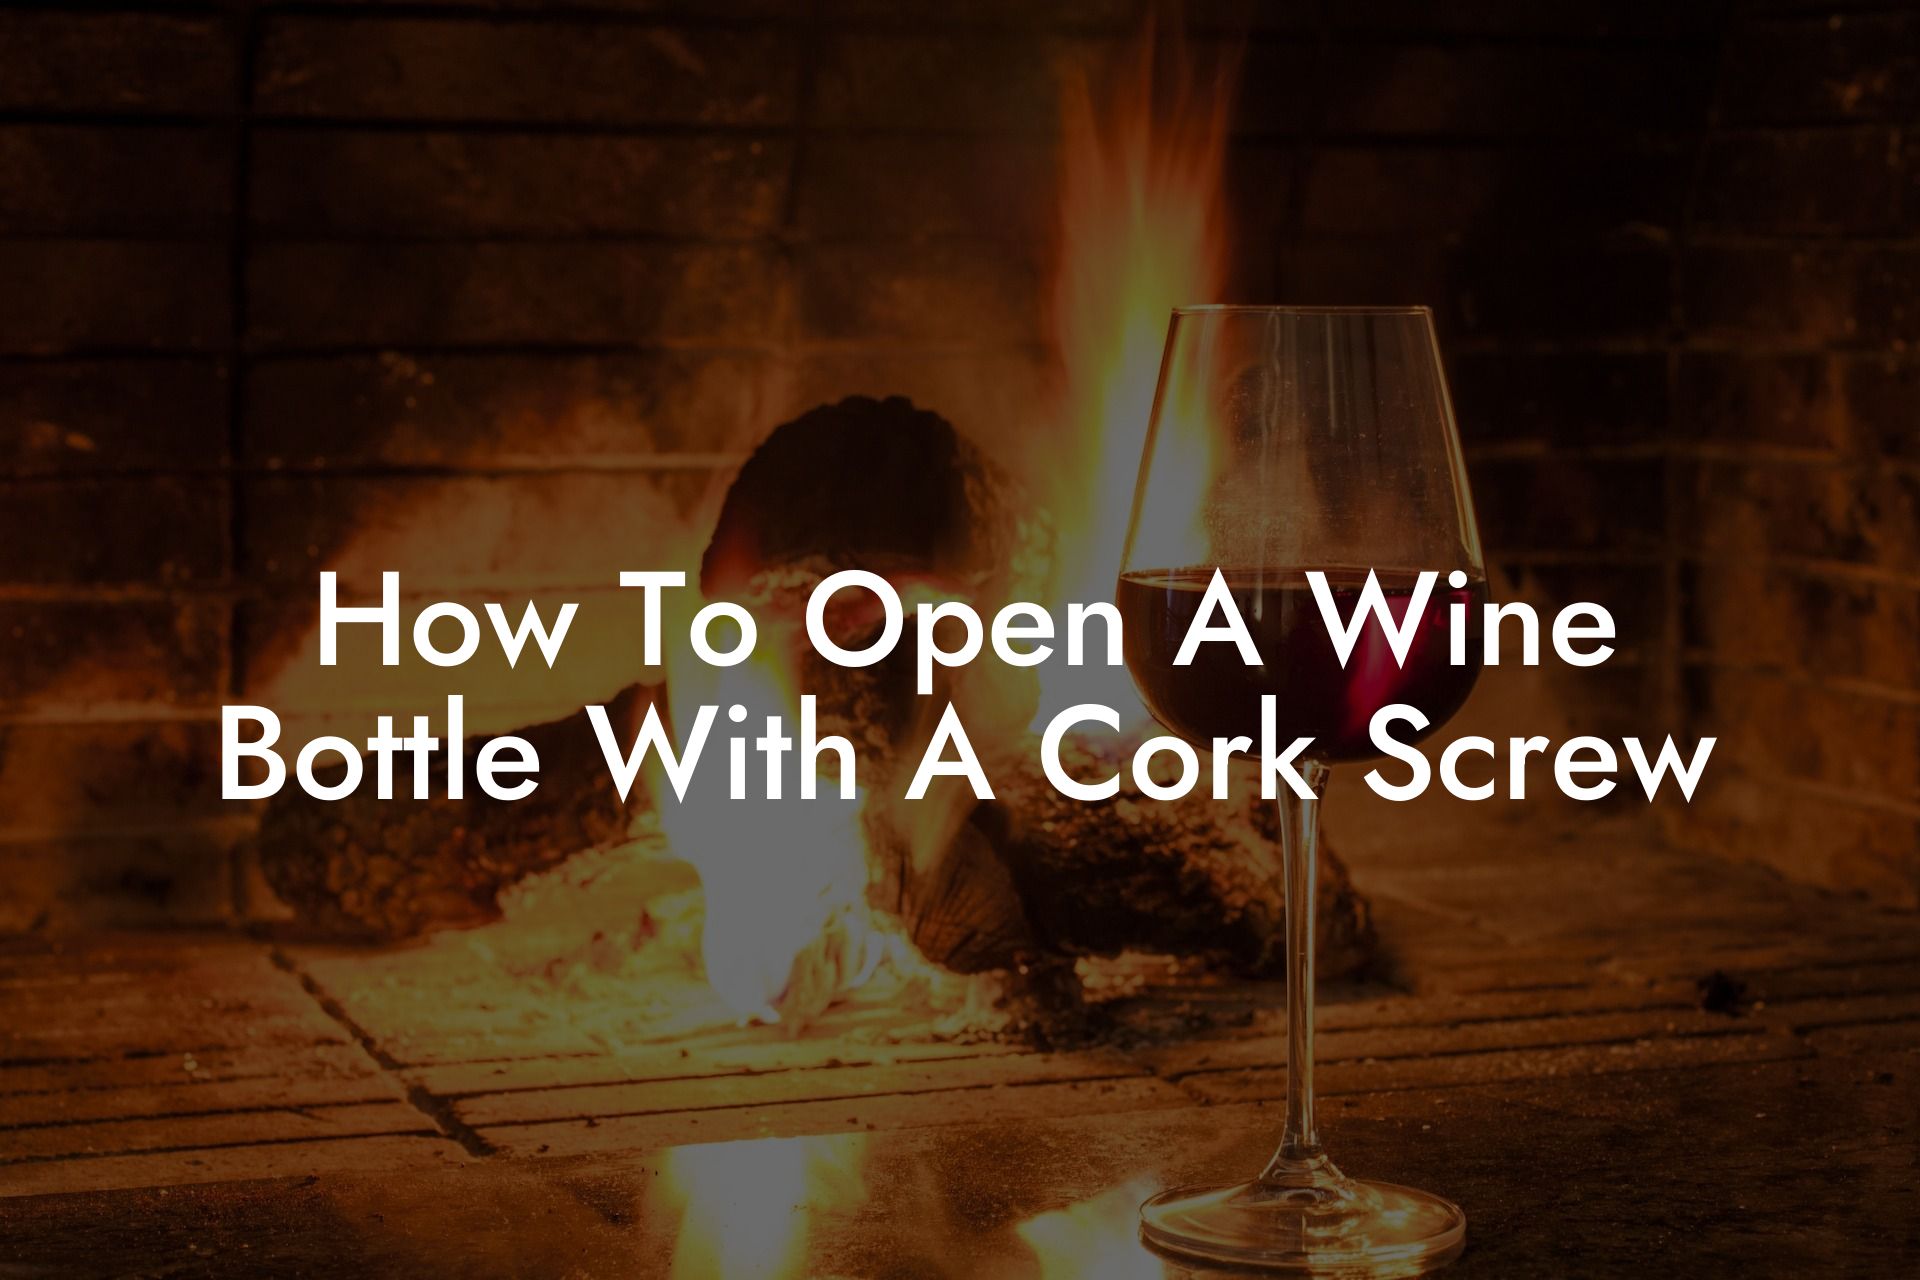 How To Open A Wine Bottle With A Cork Screw